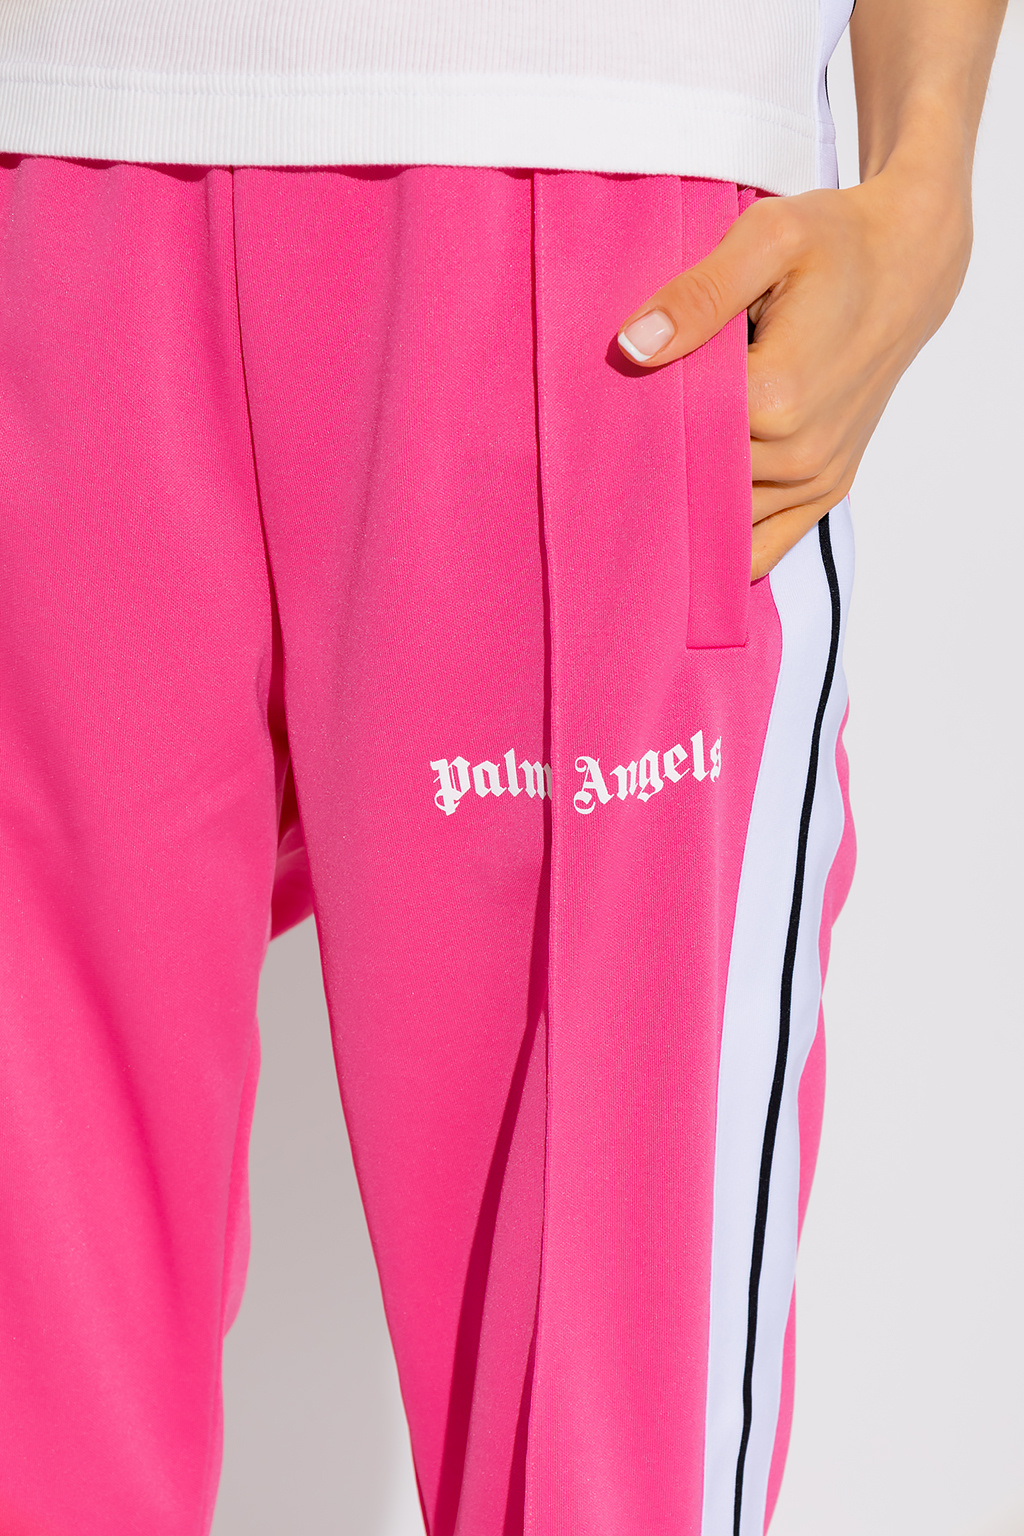 Palm Angels the hottest trend of the season